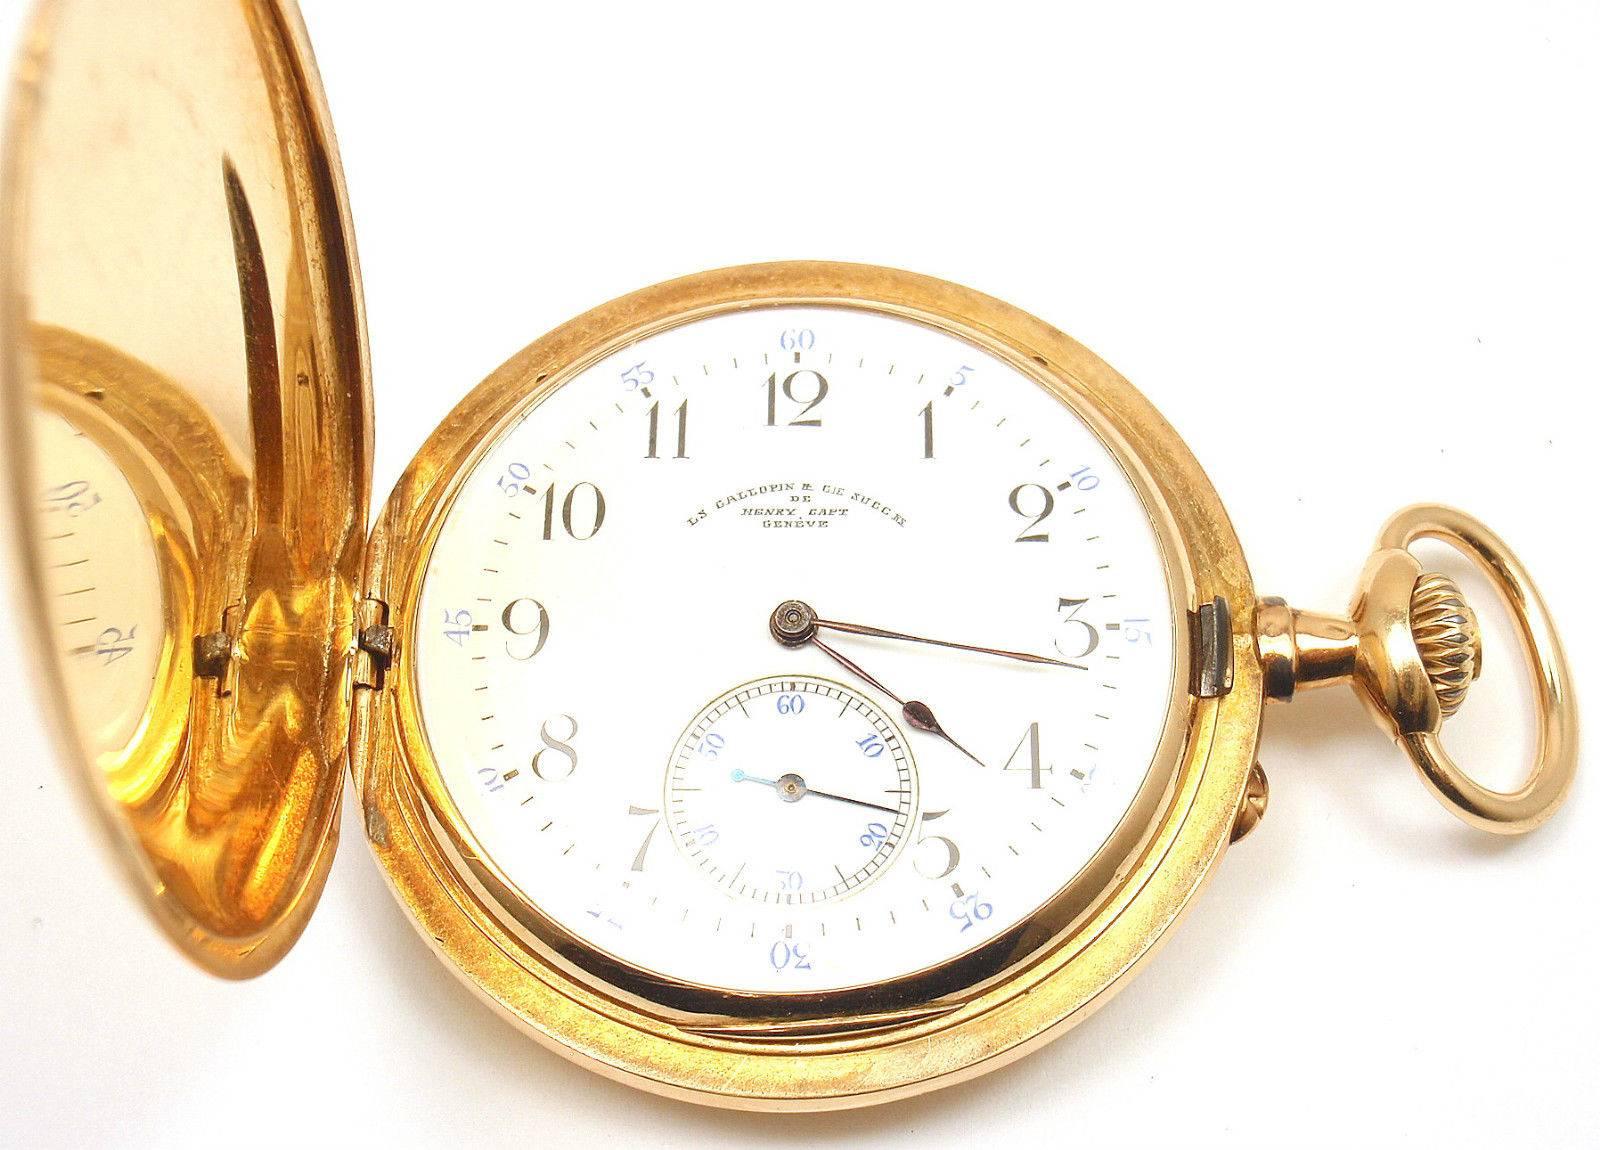 18k Yellow Gold Full Hunter Case Pocket Watch by Henry Capt. 
This watch has a solid 18k yellow gold case.
Works great, fully functional.
Details: 
Case Size: 48mm
Weight: 87.2 grams
Movement: Chronoautomatic
Stamped Hallmarks: Henry Capt, L.